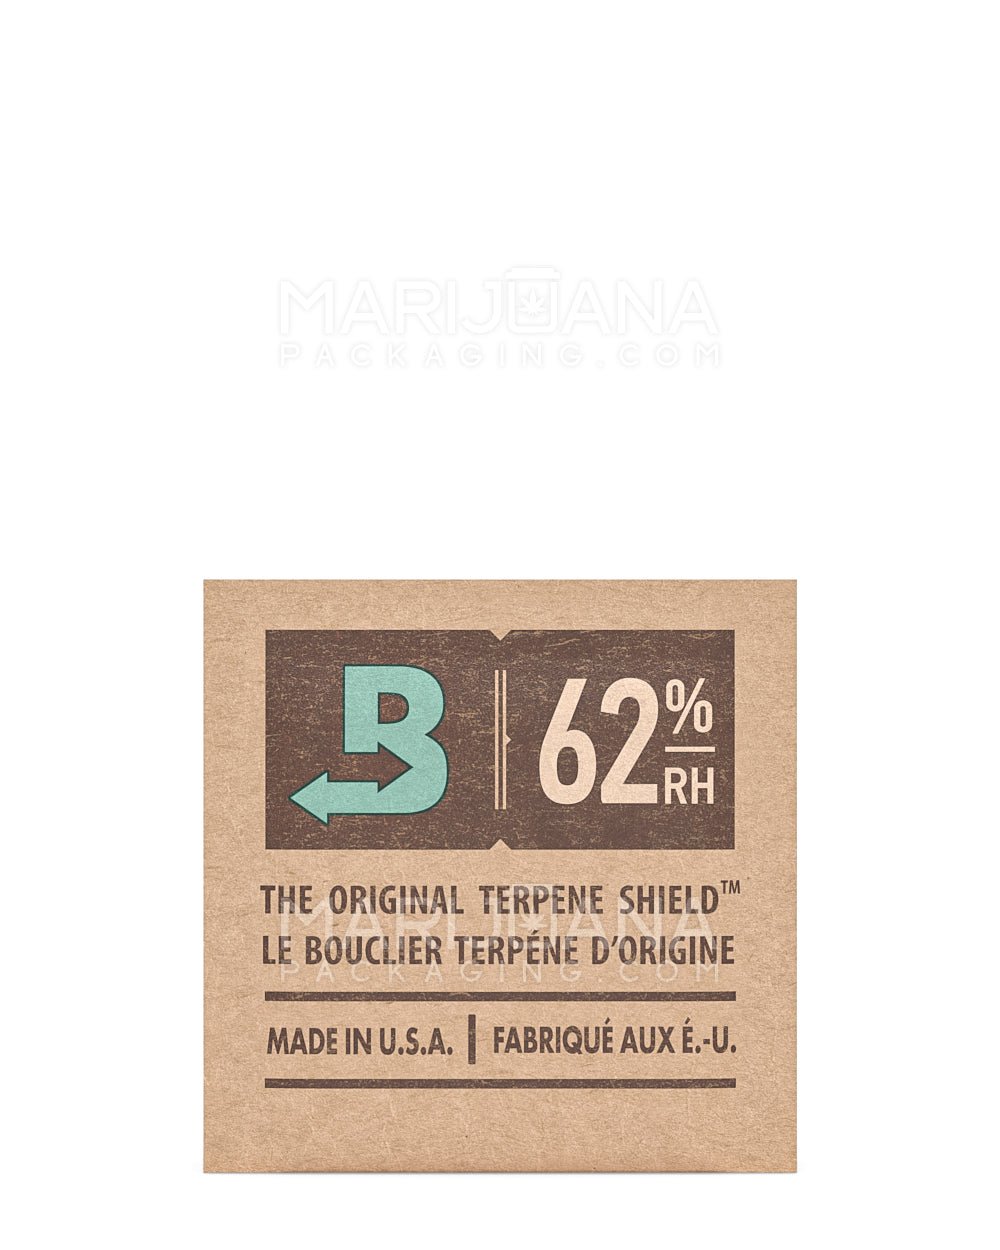 BOVEDA | Humidity Control Packs | 1 Grams - 62% - 1500 Count - 2